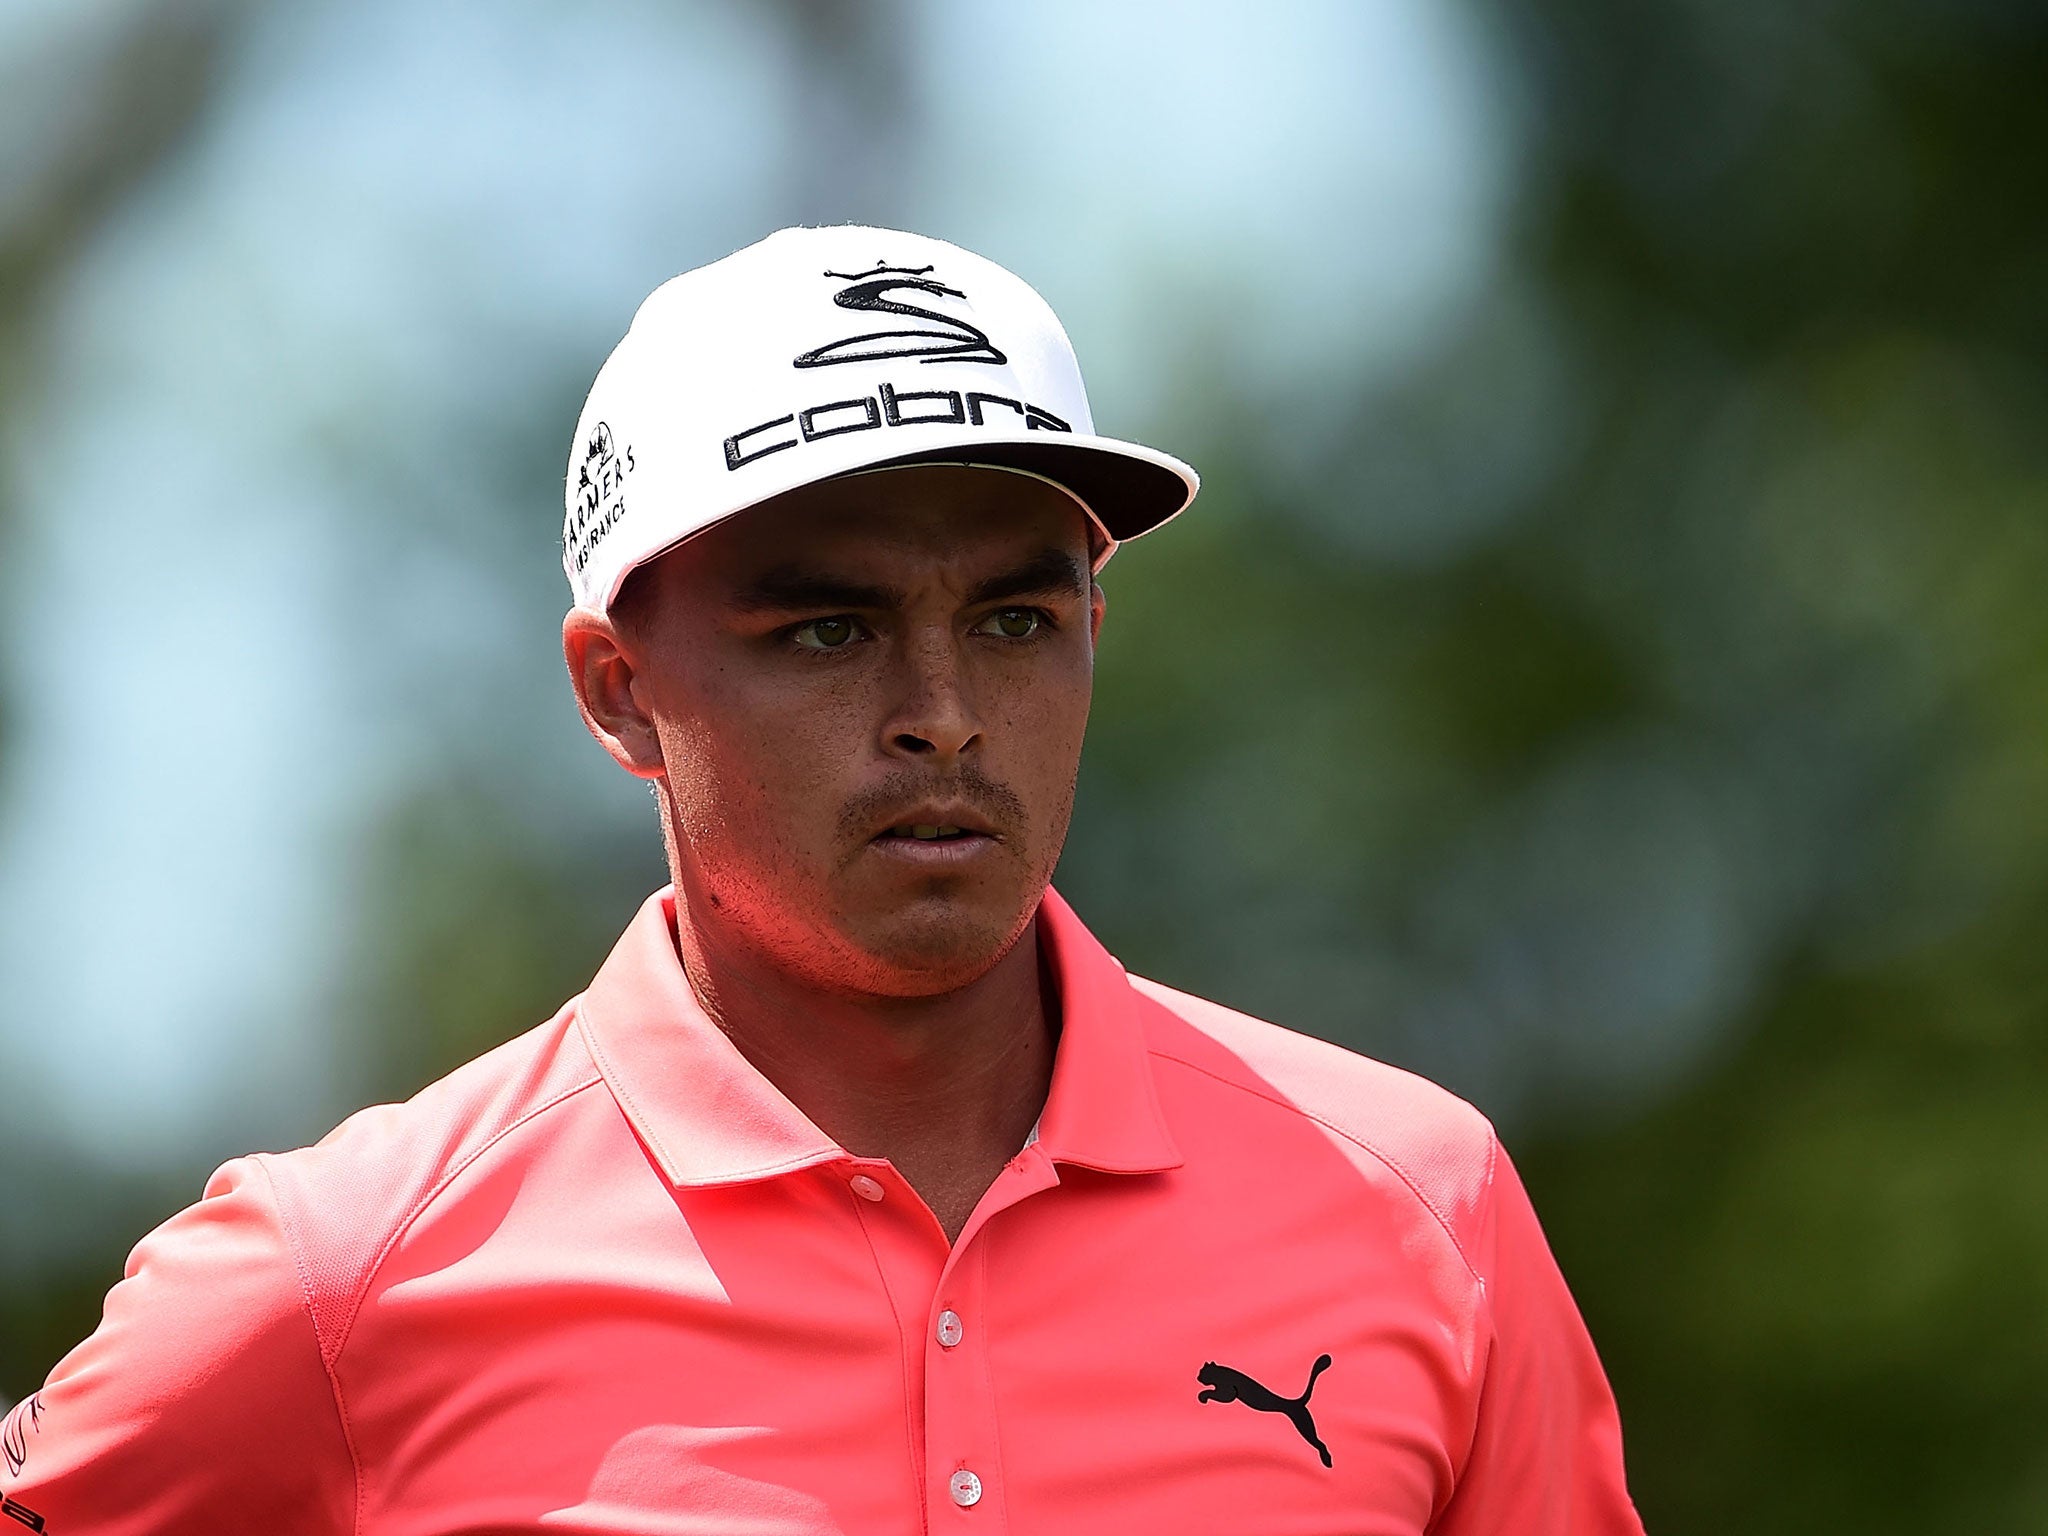 Rickie Fowler leads the Shell Houston Open after the first round